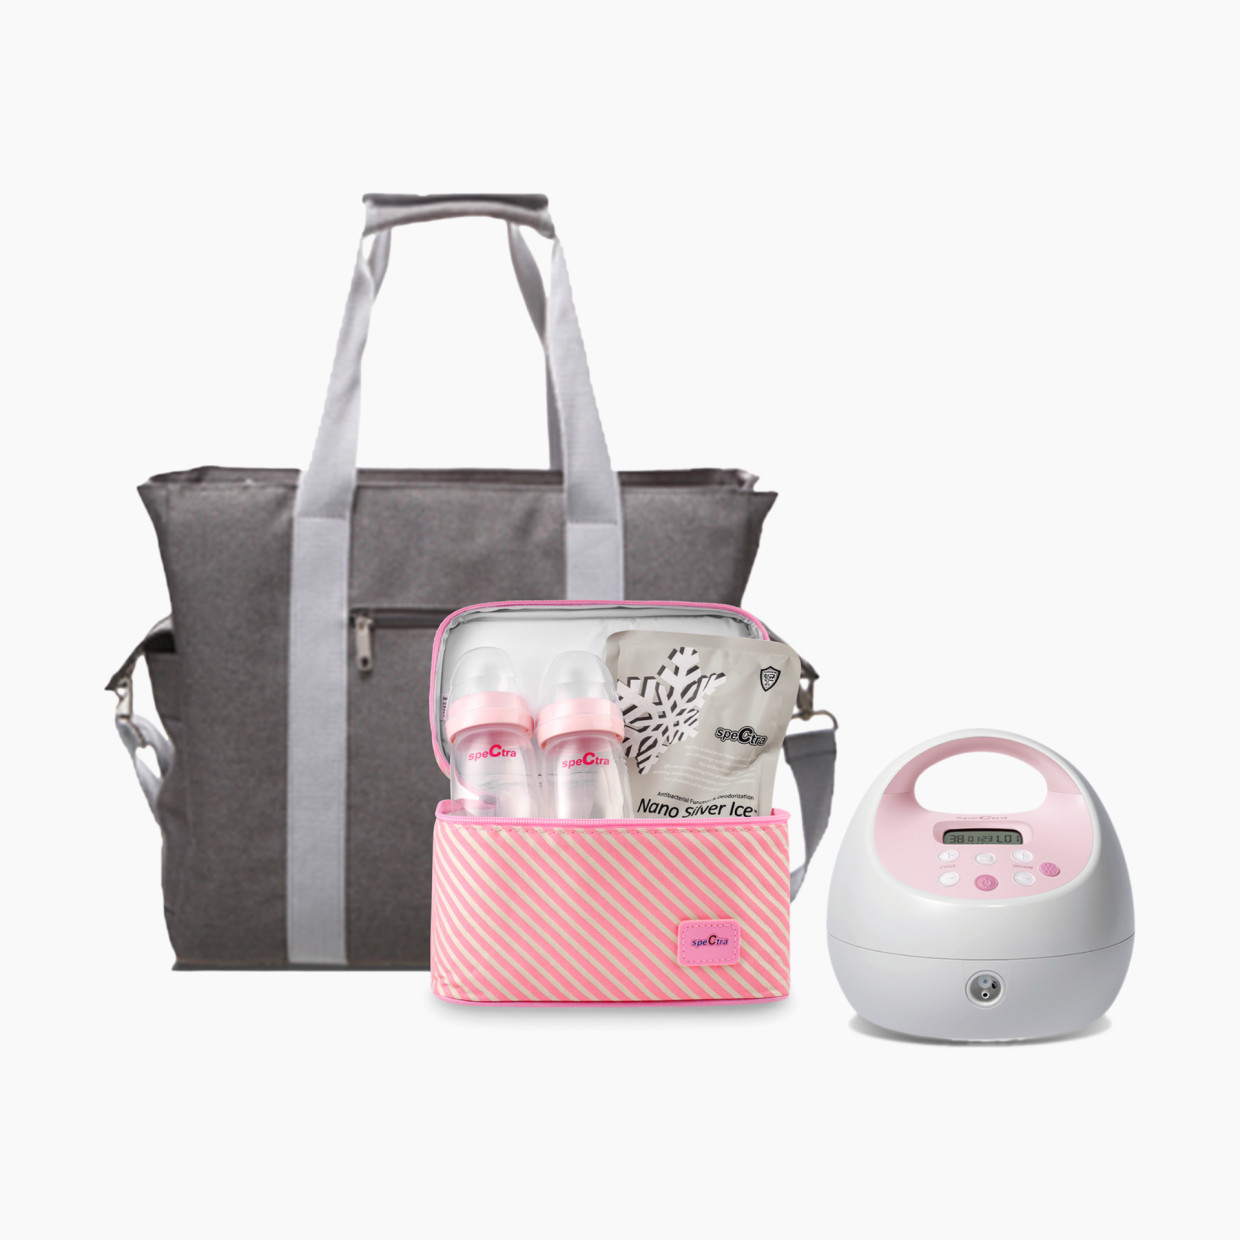 Spectra S2 Plus Electric Breast Pump with Tote Bag and Accessories.